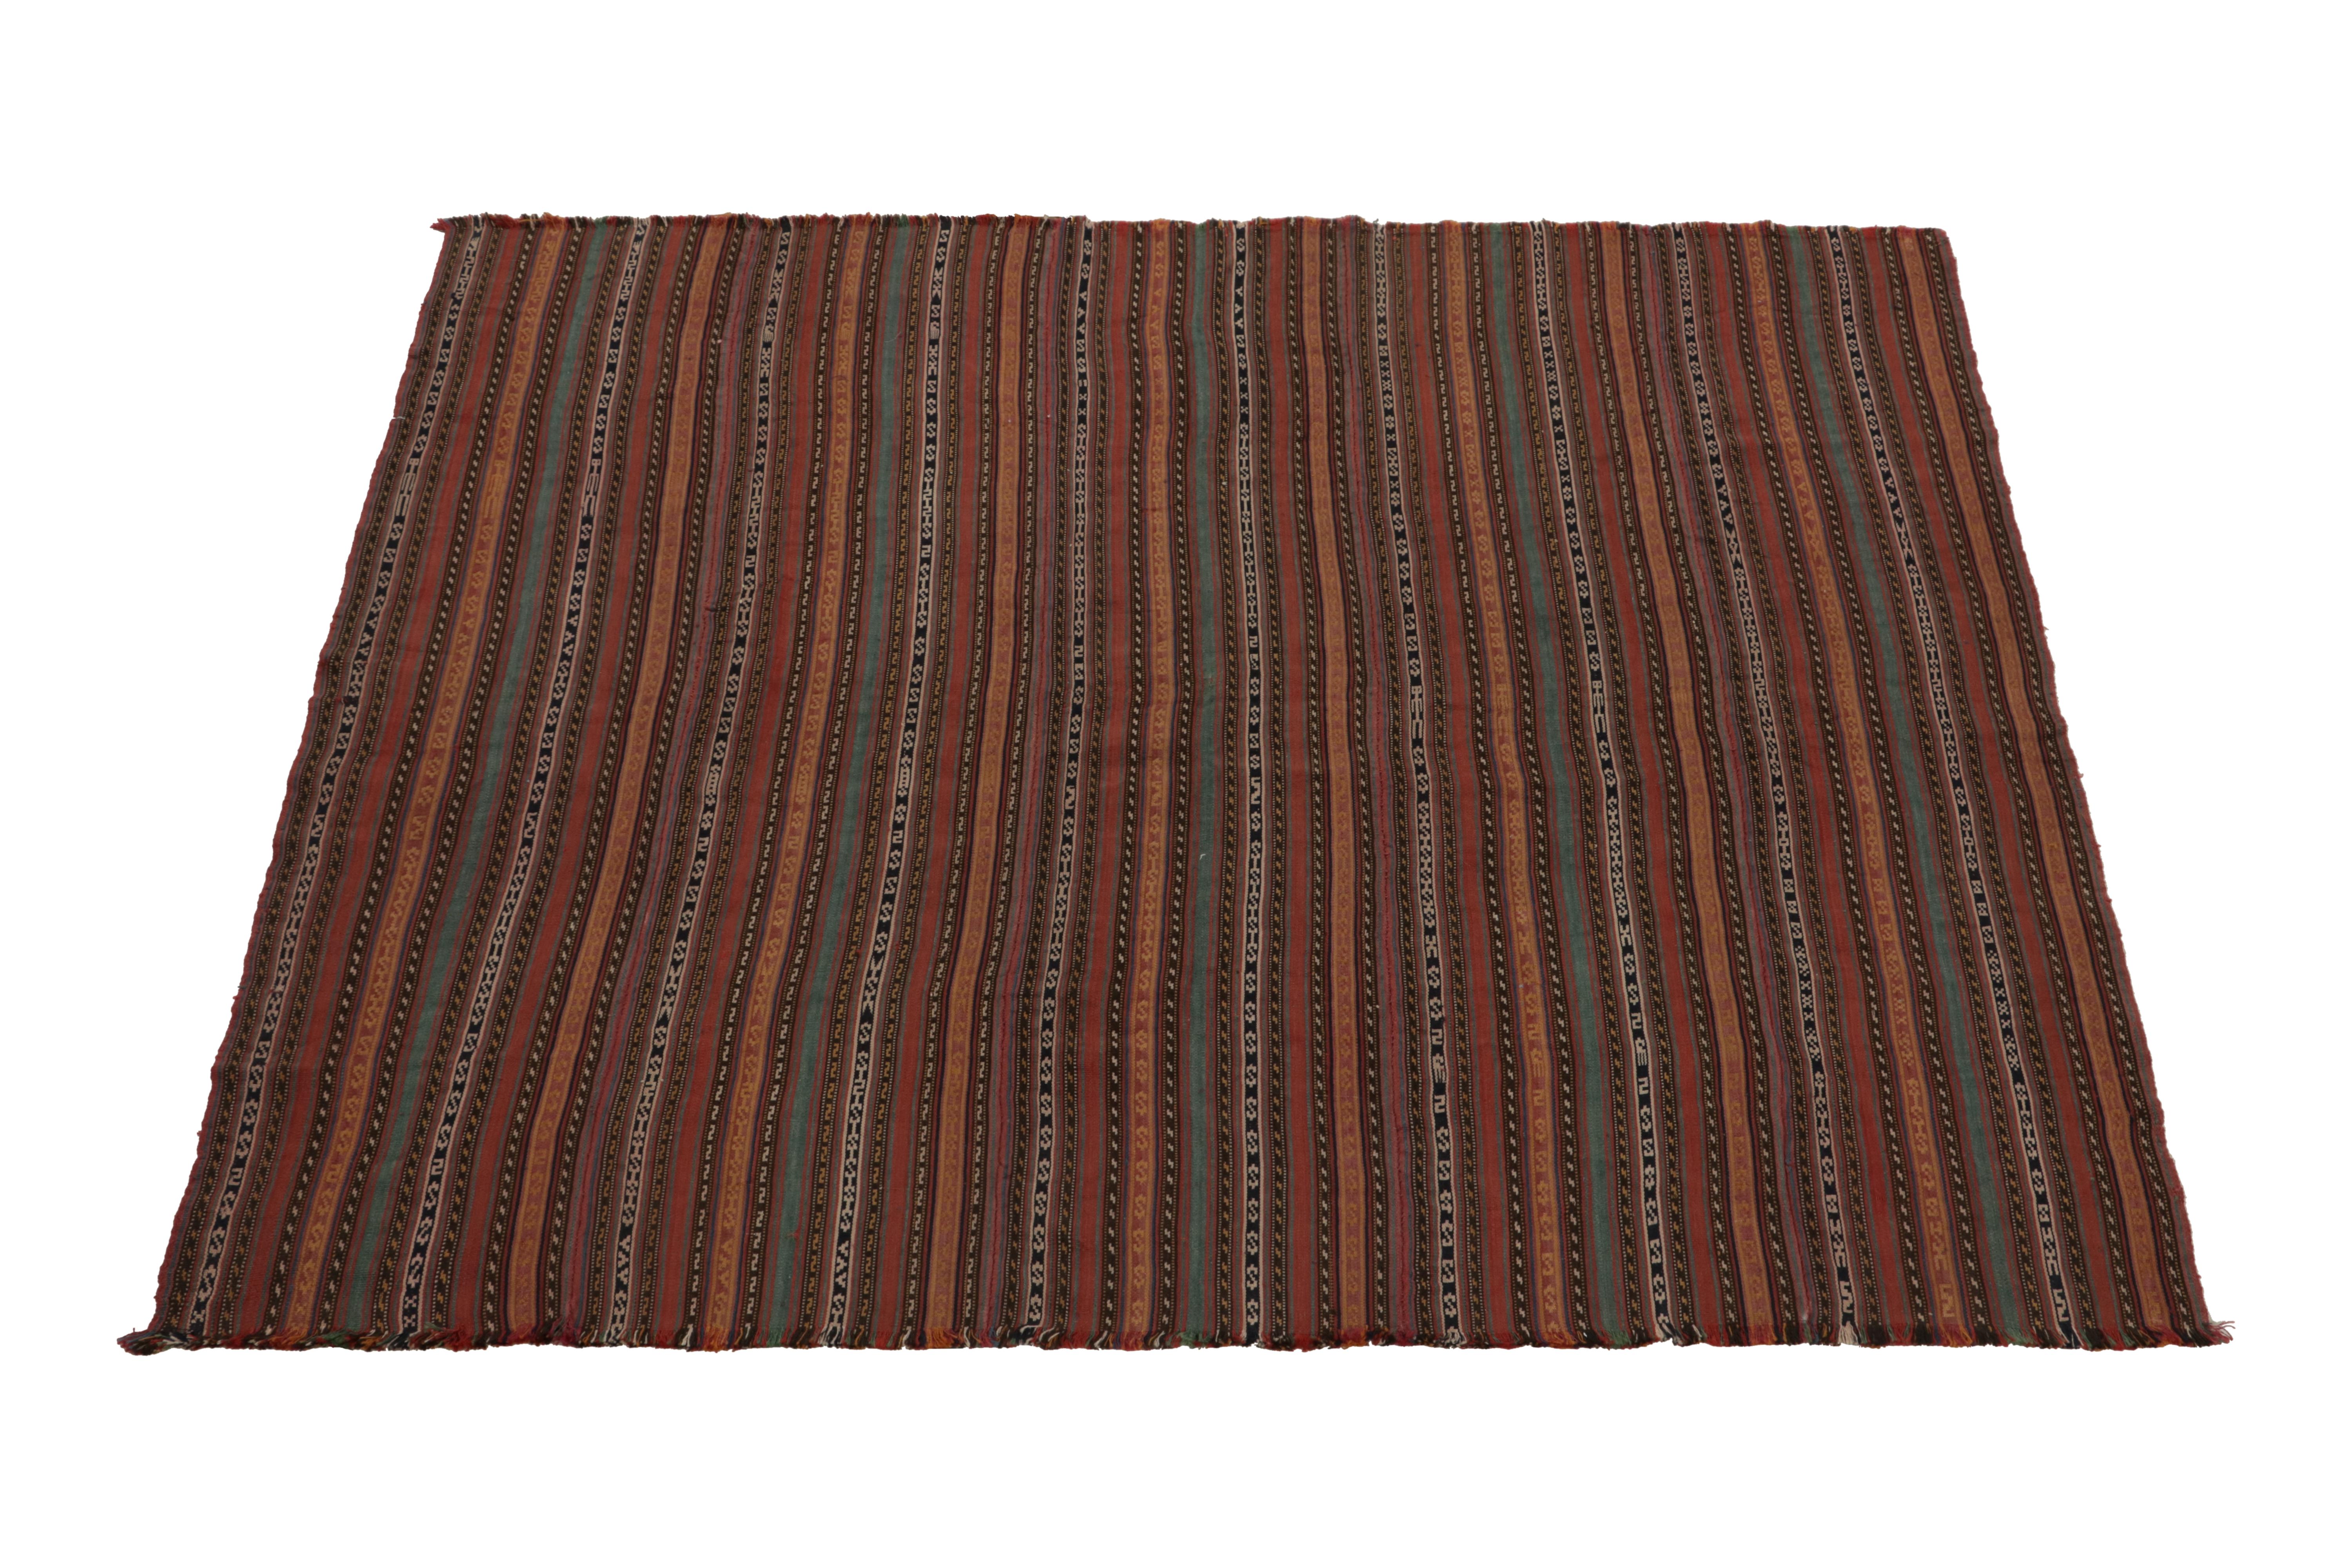 This vintage 6x6 square Persian kilim is a Jajim style curation, handwoven in wool circa 1950-1960. 

Further on the Design:

This rich repeat design prefers brick red, forest green, rust, and brown in a gorgeous yet simple play of polychromatic